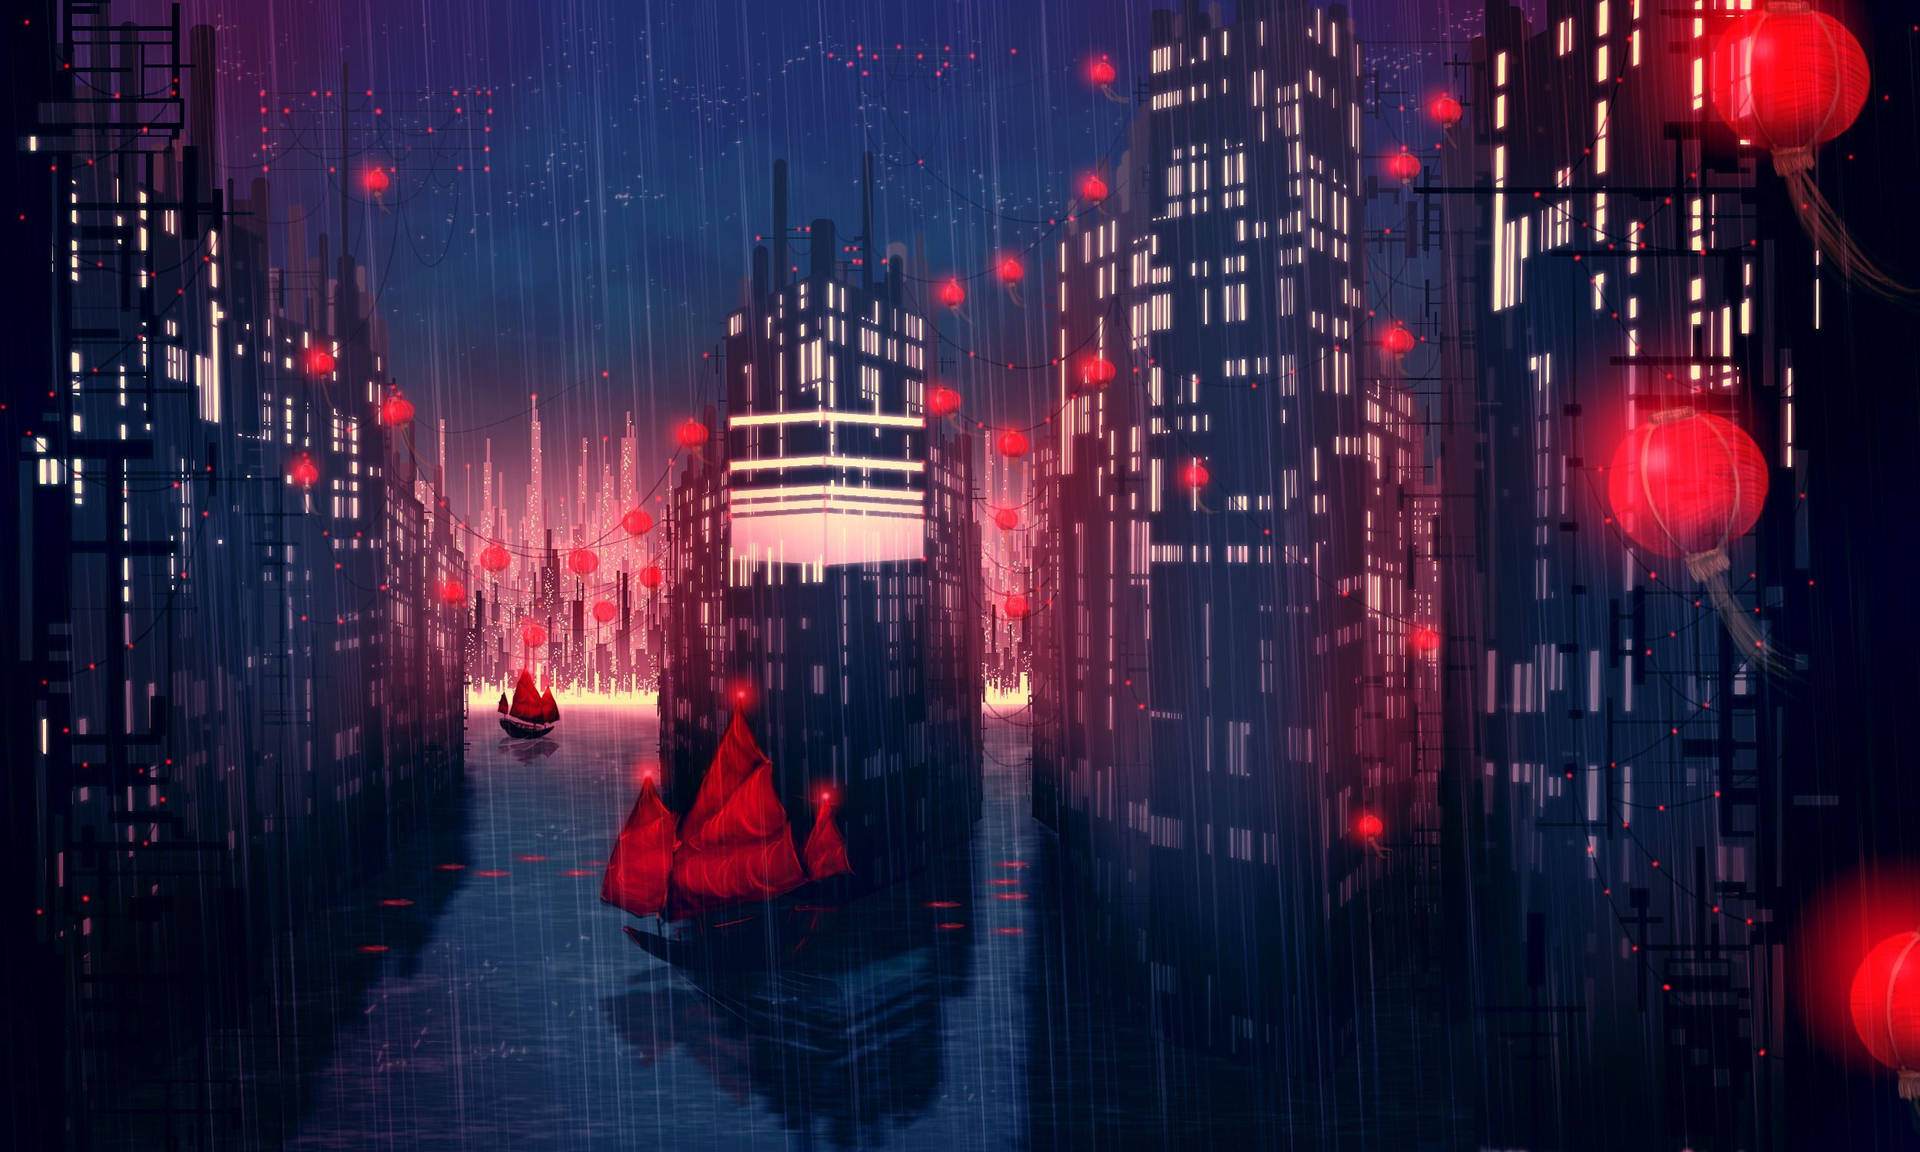 Animation Black And Red City With Boats